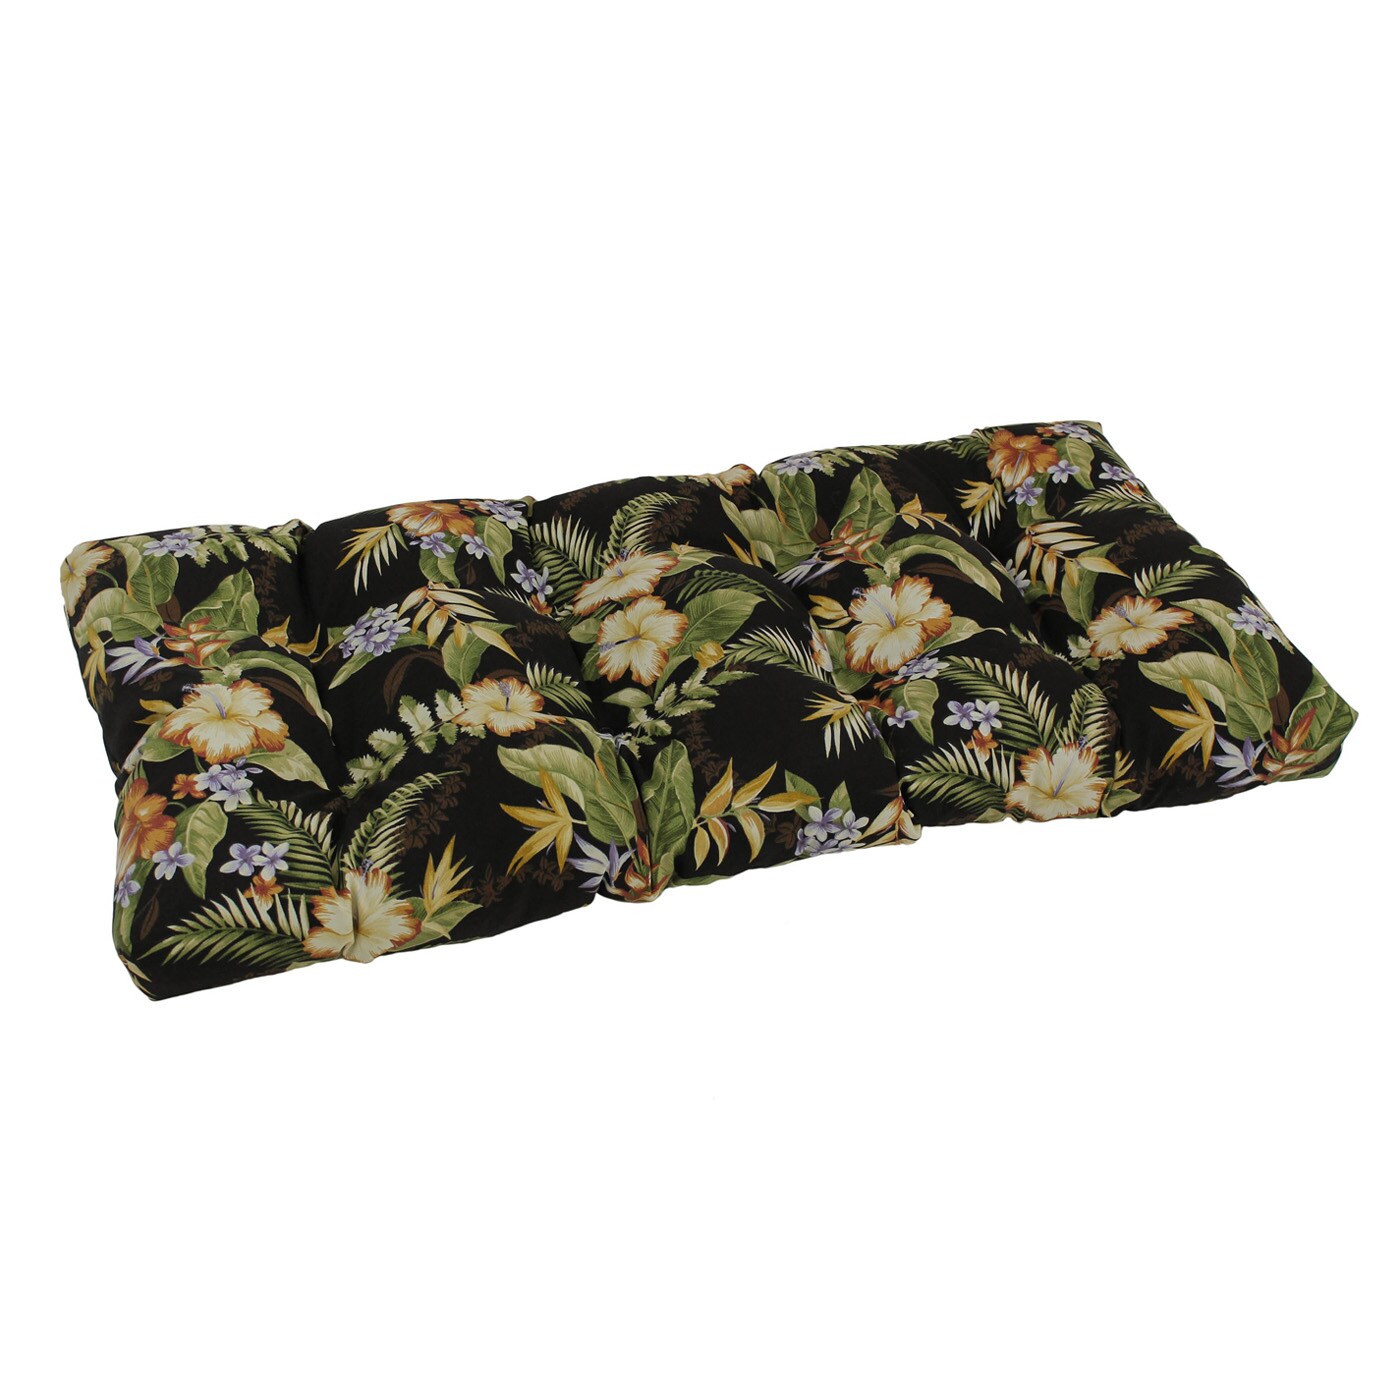 Blazing Needles 960X19-REO-64 60 x 19 in. Patterned Outdoor Spun Polyester Bench Cushion Telfair Peacock